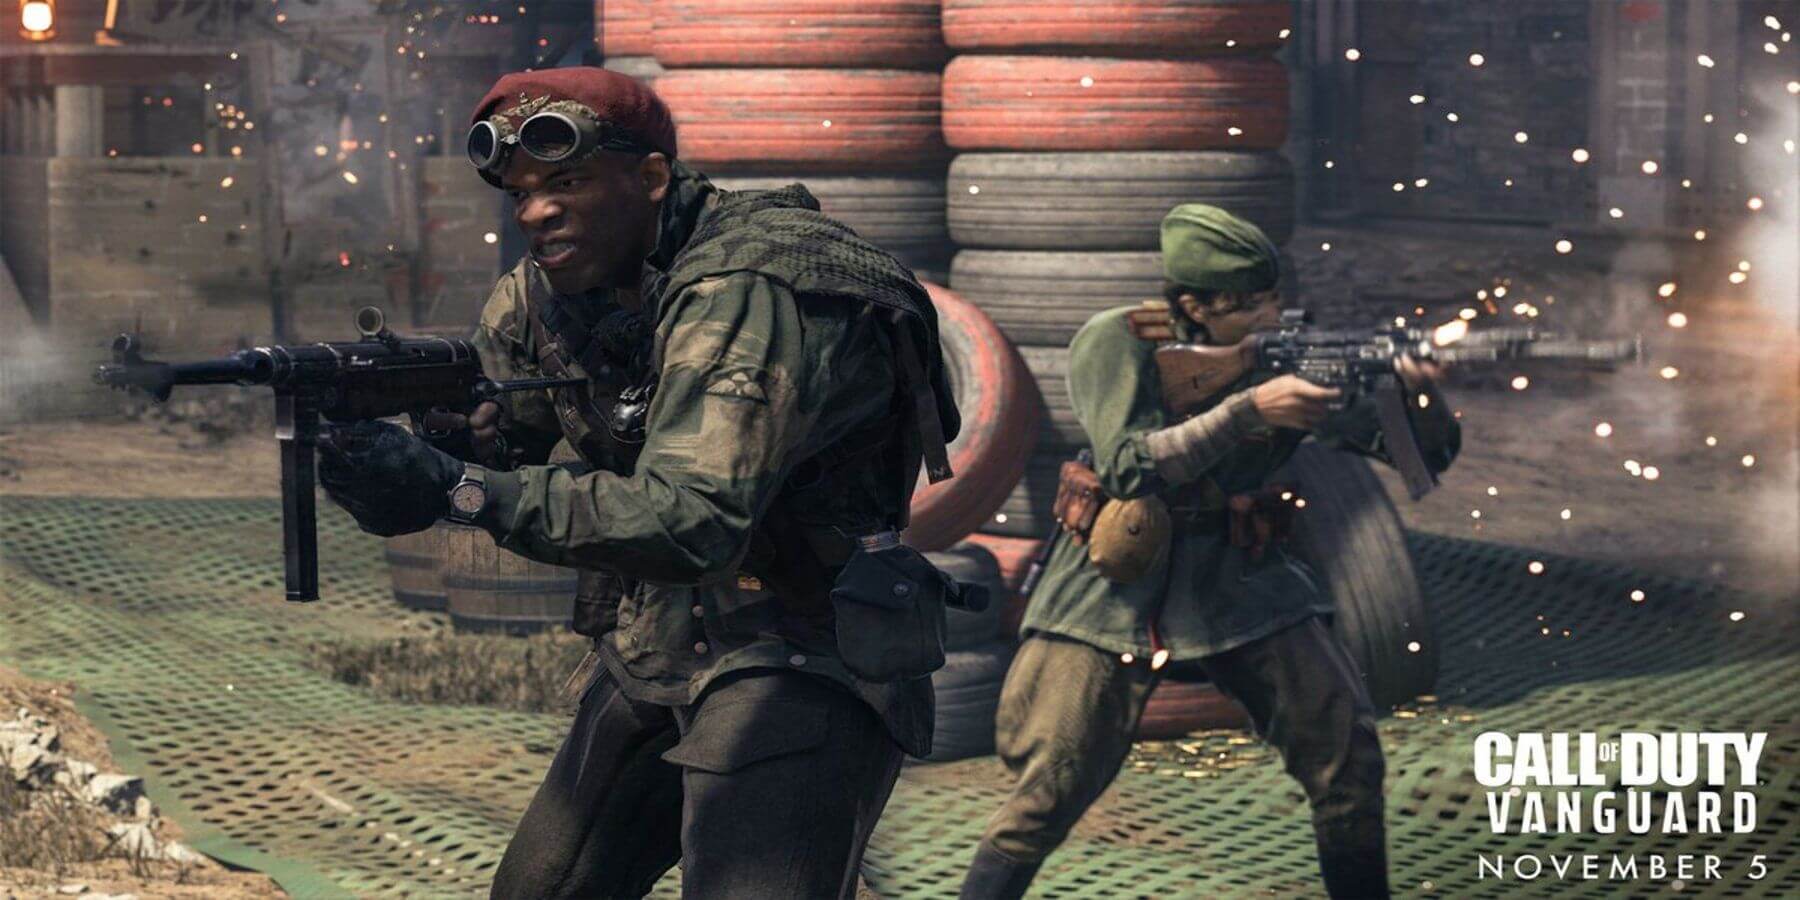 Call of Duty: Vanguard characters fighting in battle